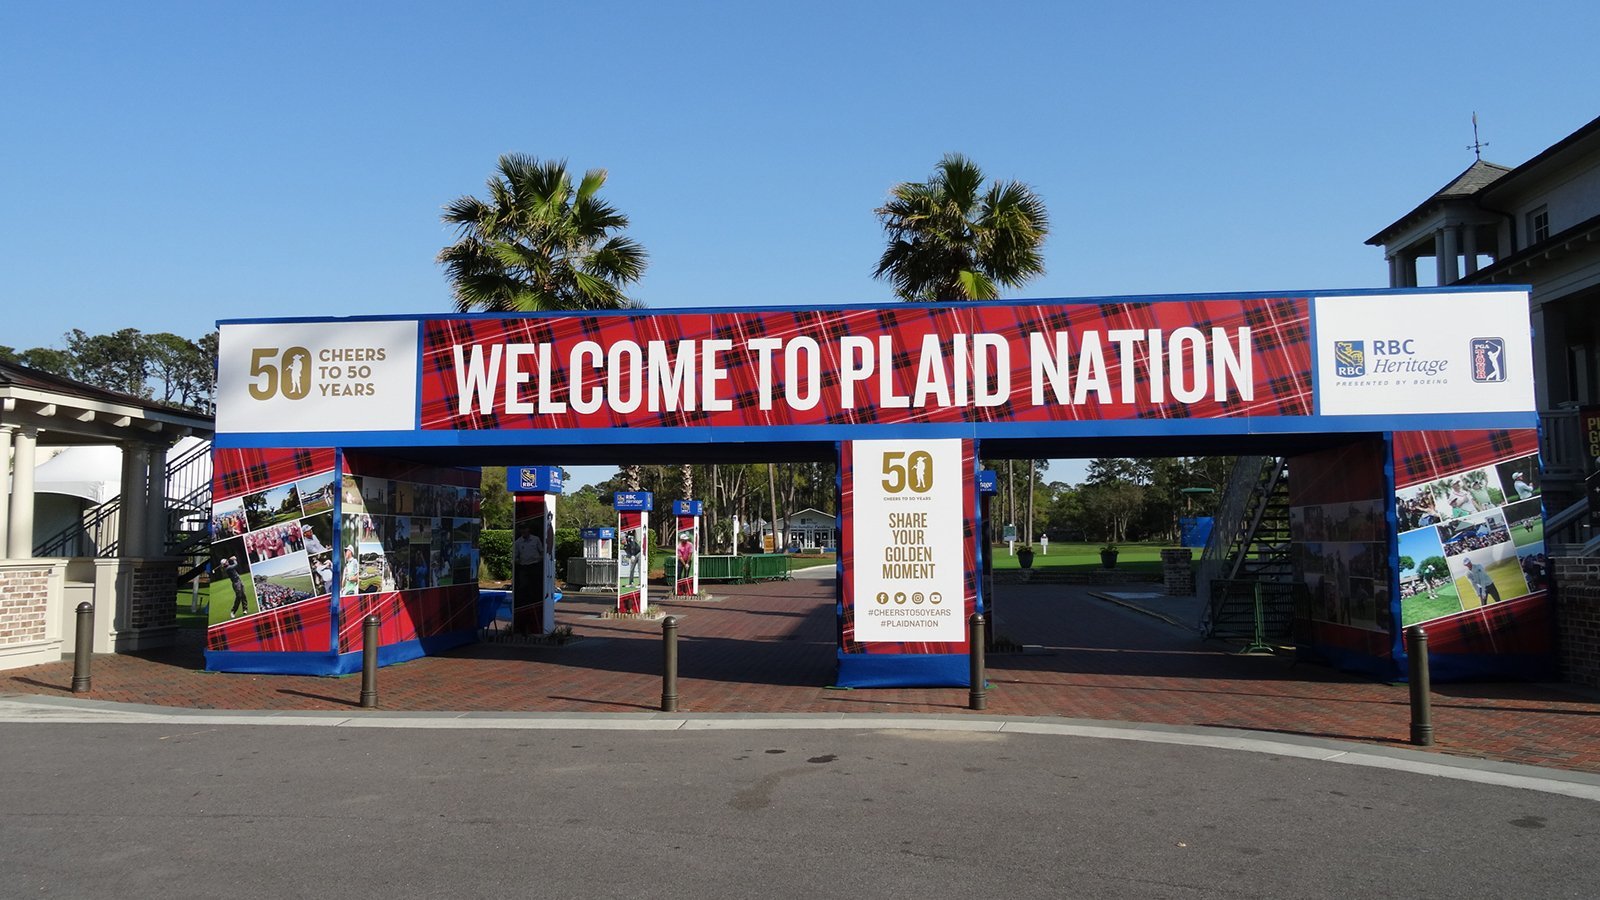 2018 RBC Heritage Welcomes You to Plaid Nation